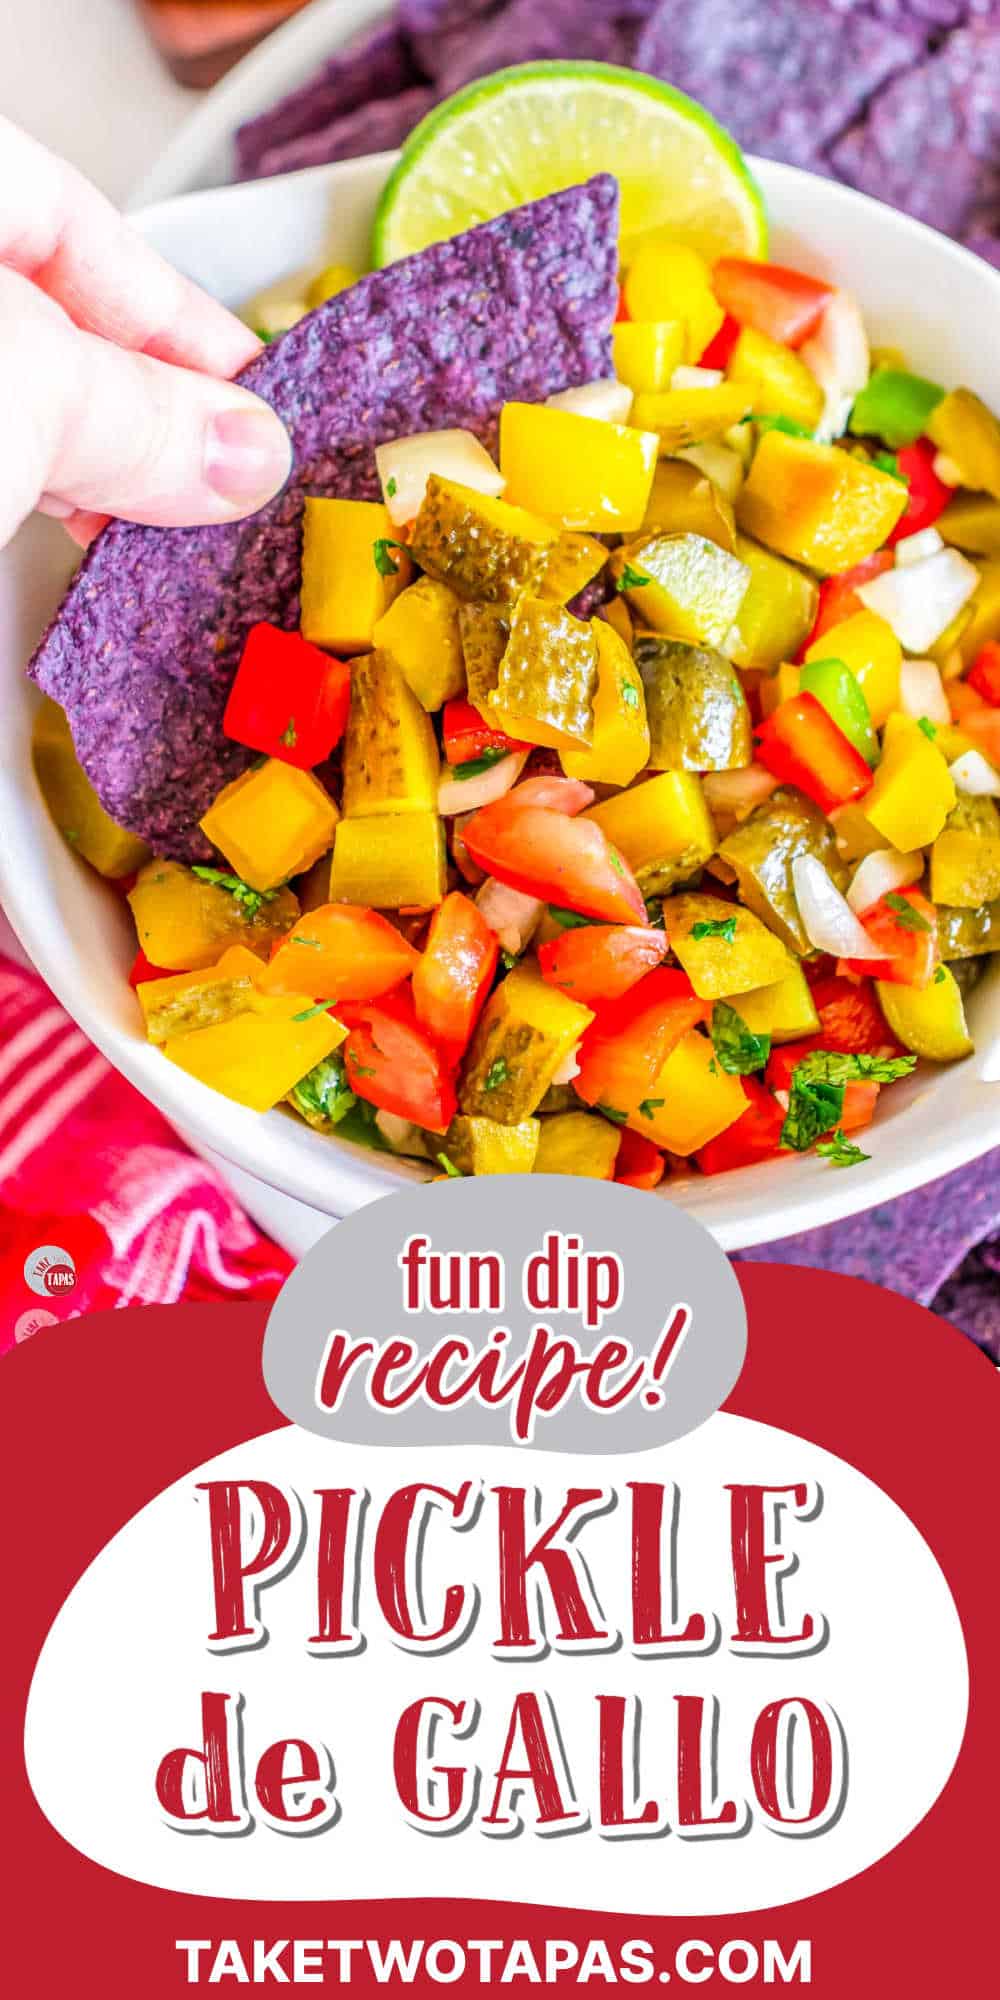 pickle de gallo recipe with red banner and red text